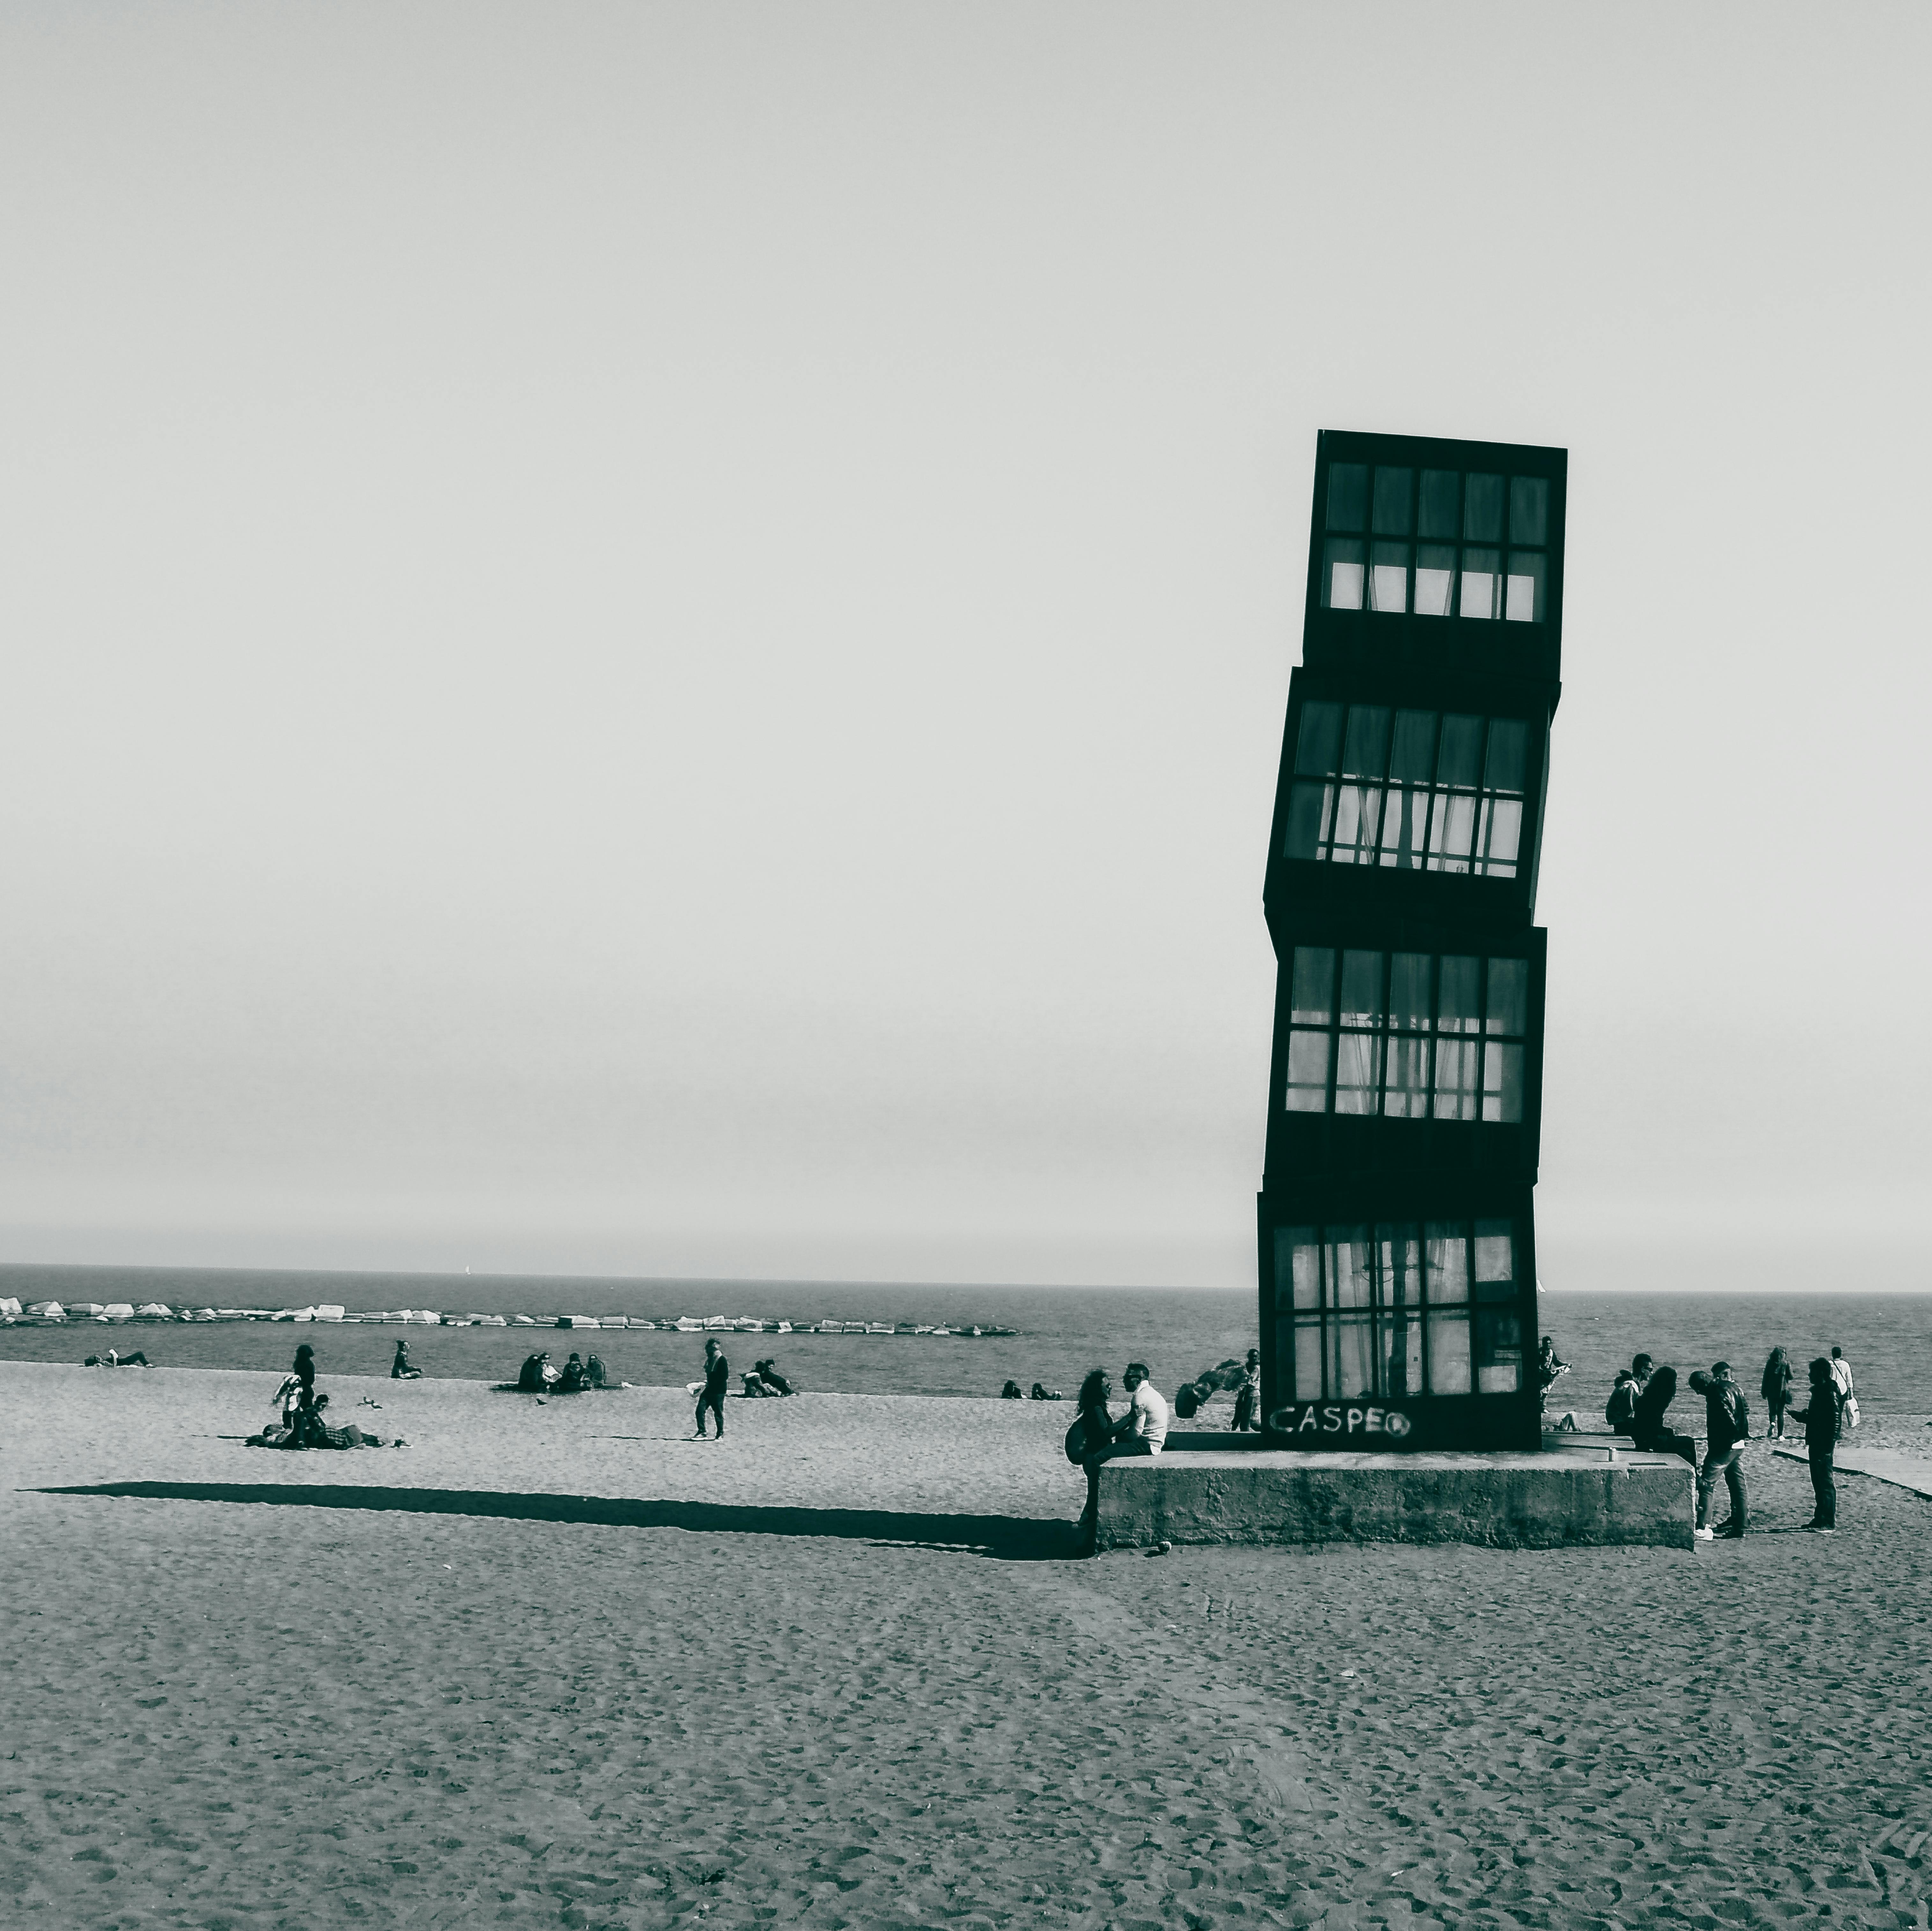 a grayscale photo of people on the beach near the famous landmark